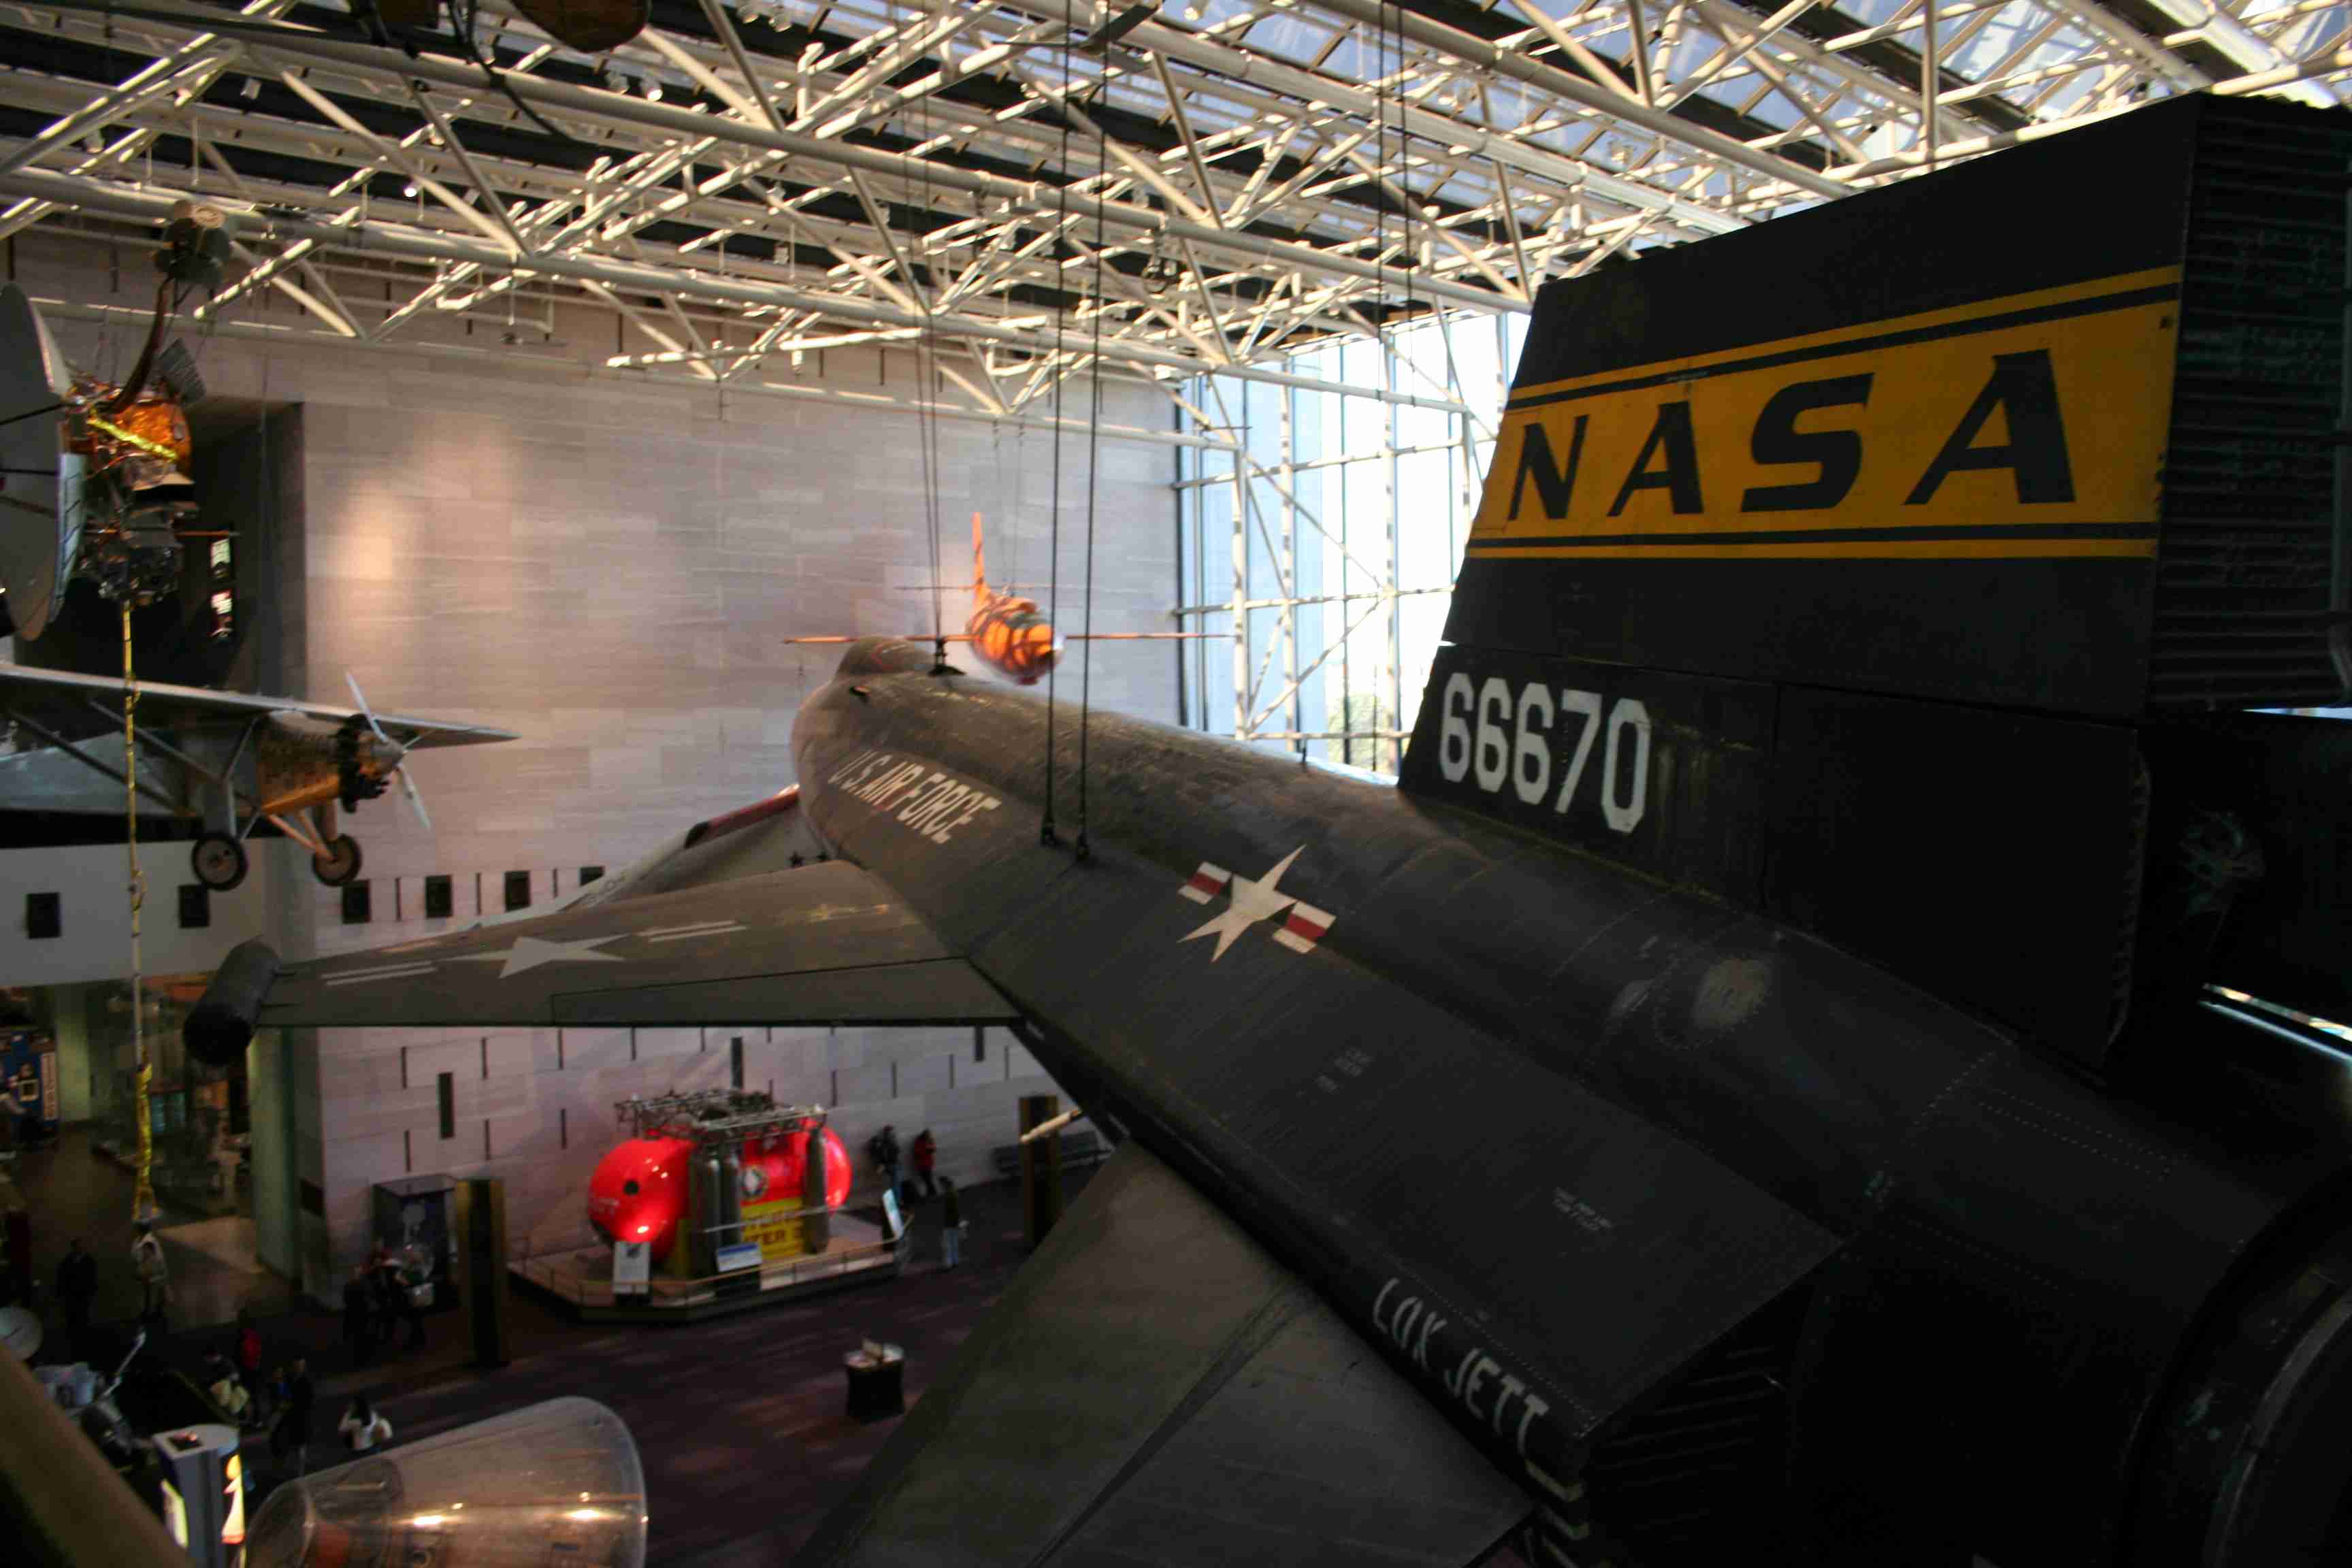 Images Wikimedia Commons/16 NASA 350z33 (talk) X15_566670_Air_and_Space.jpg